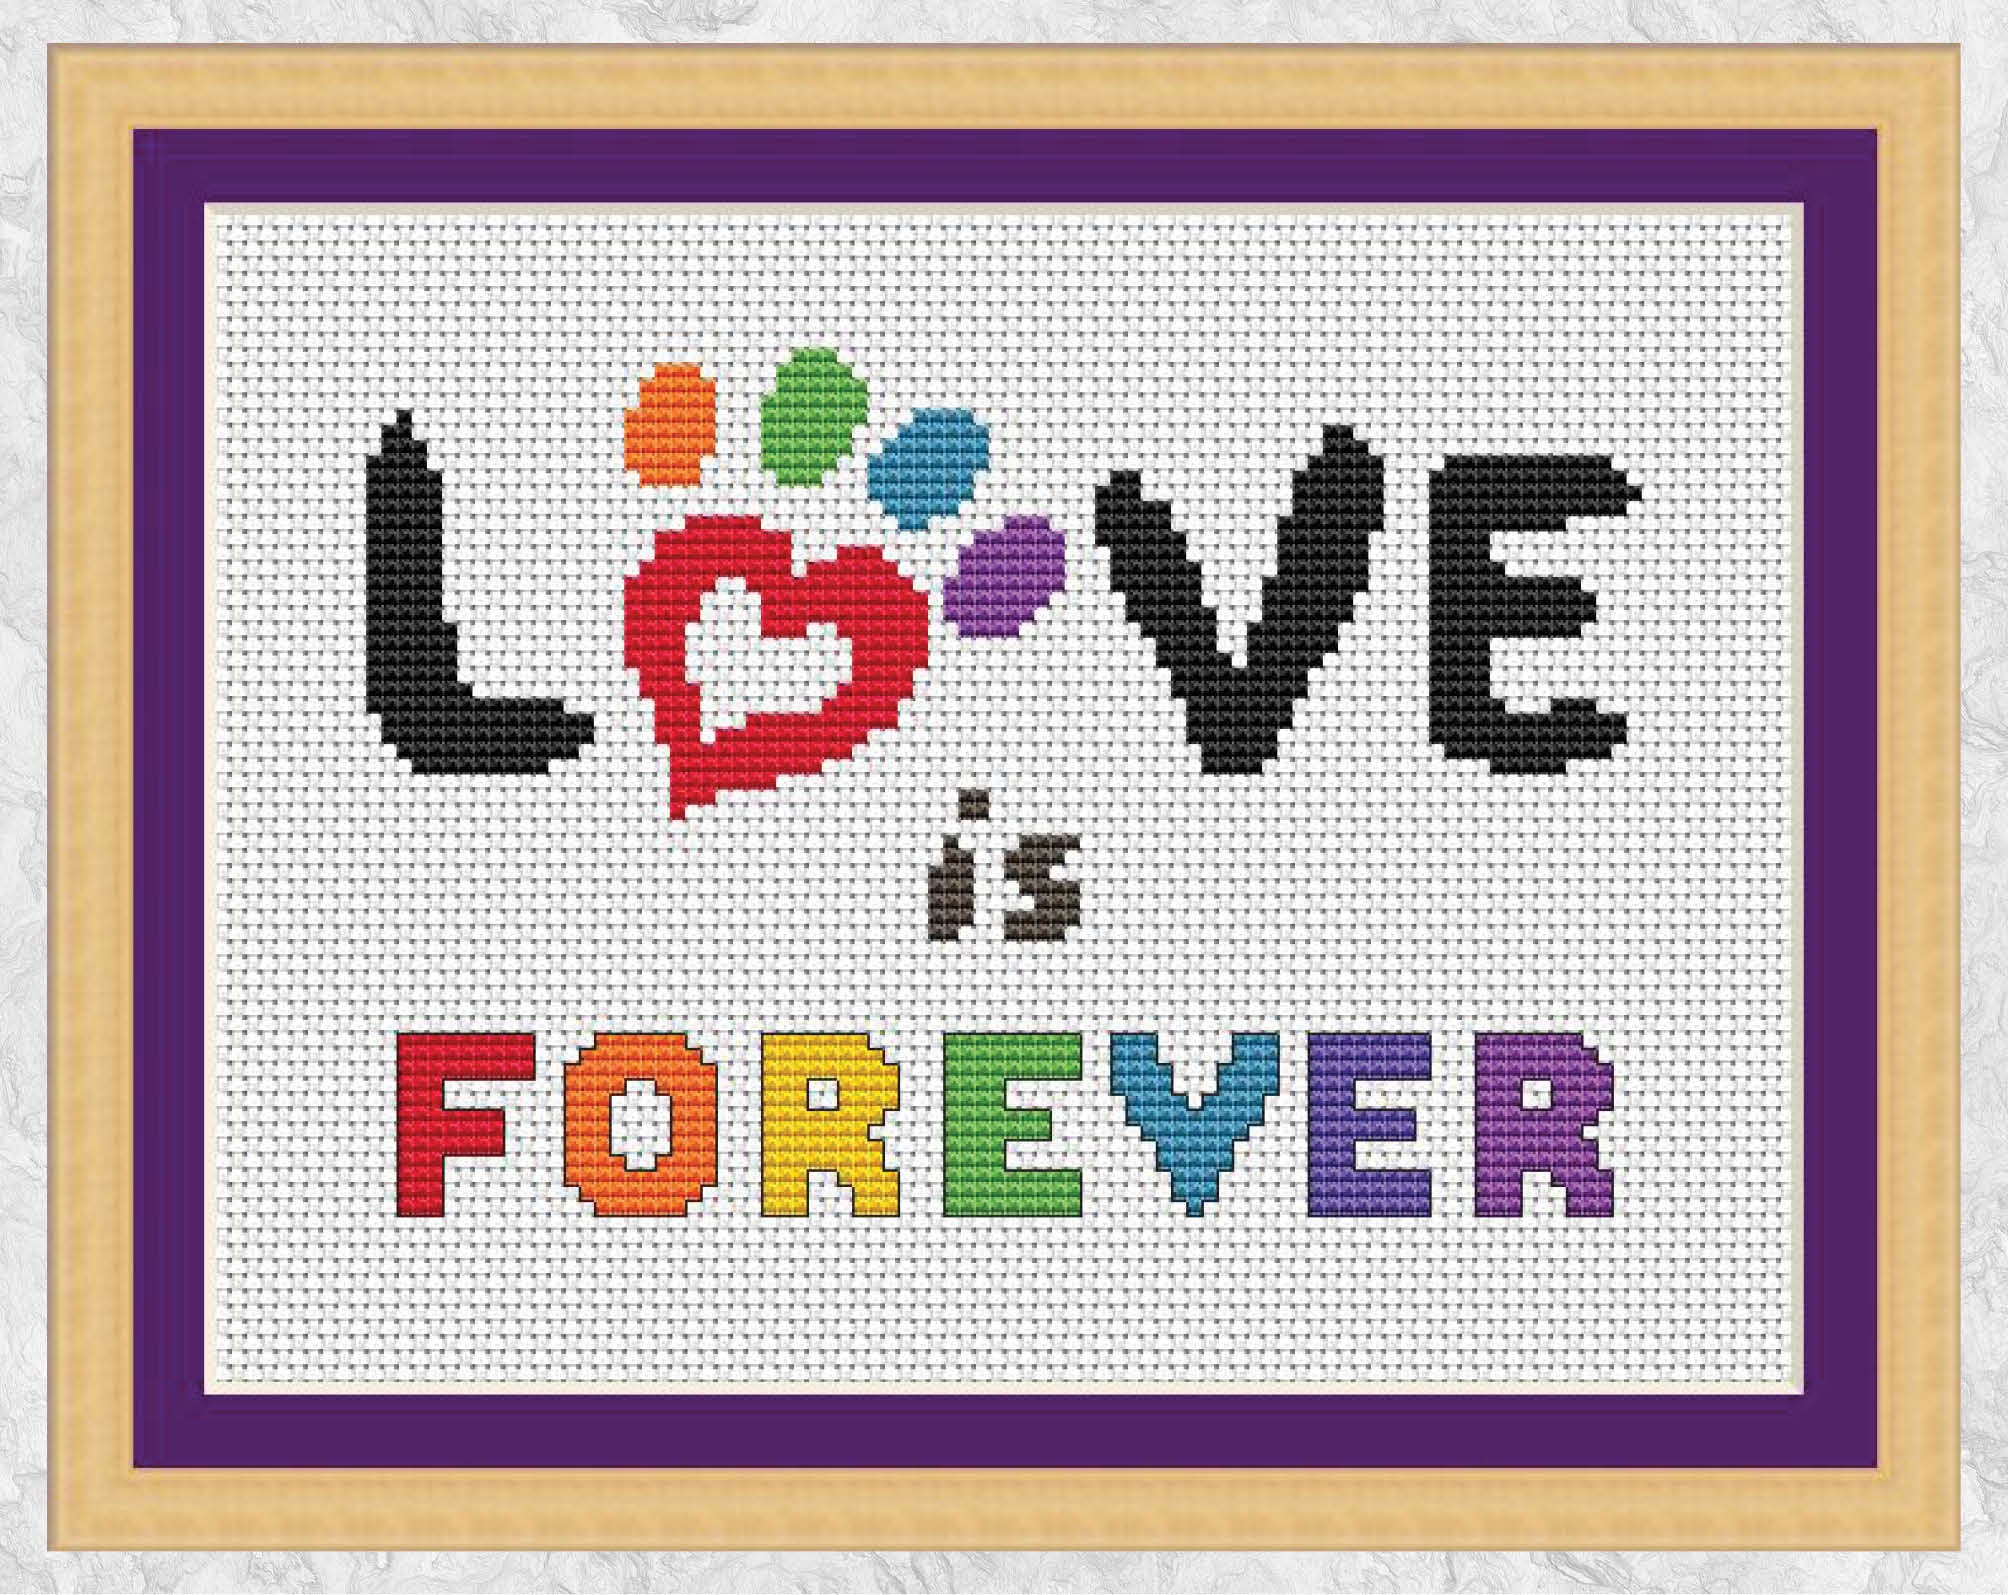 Cross stitch pattern of the words "Love is Forever" with a paw print heart and the colours of the rainbow - with frame